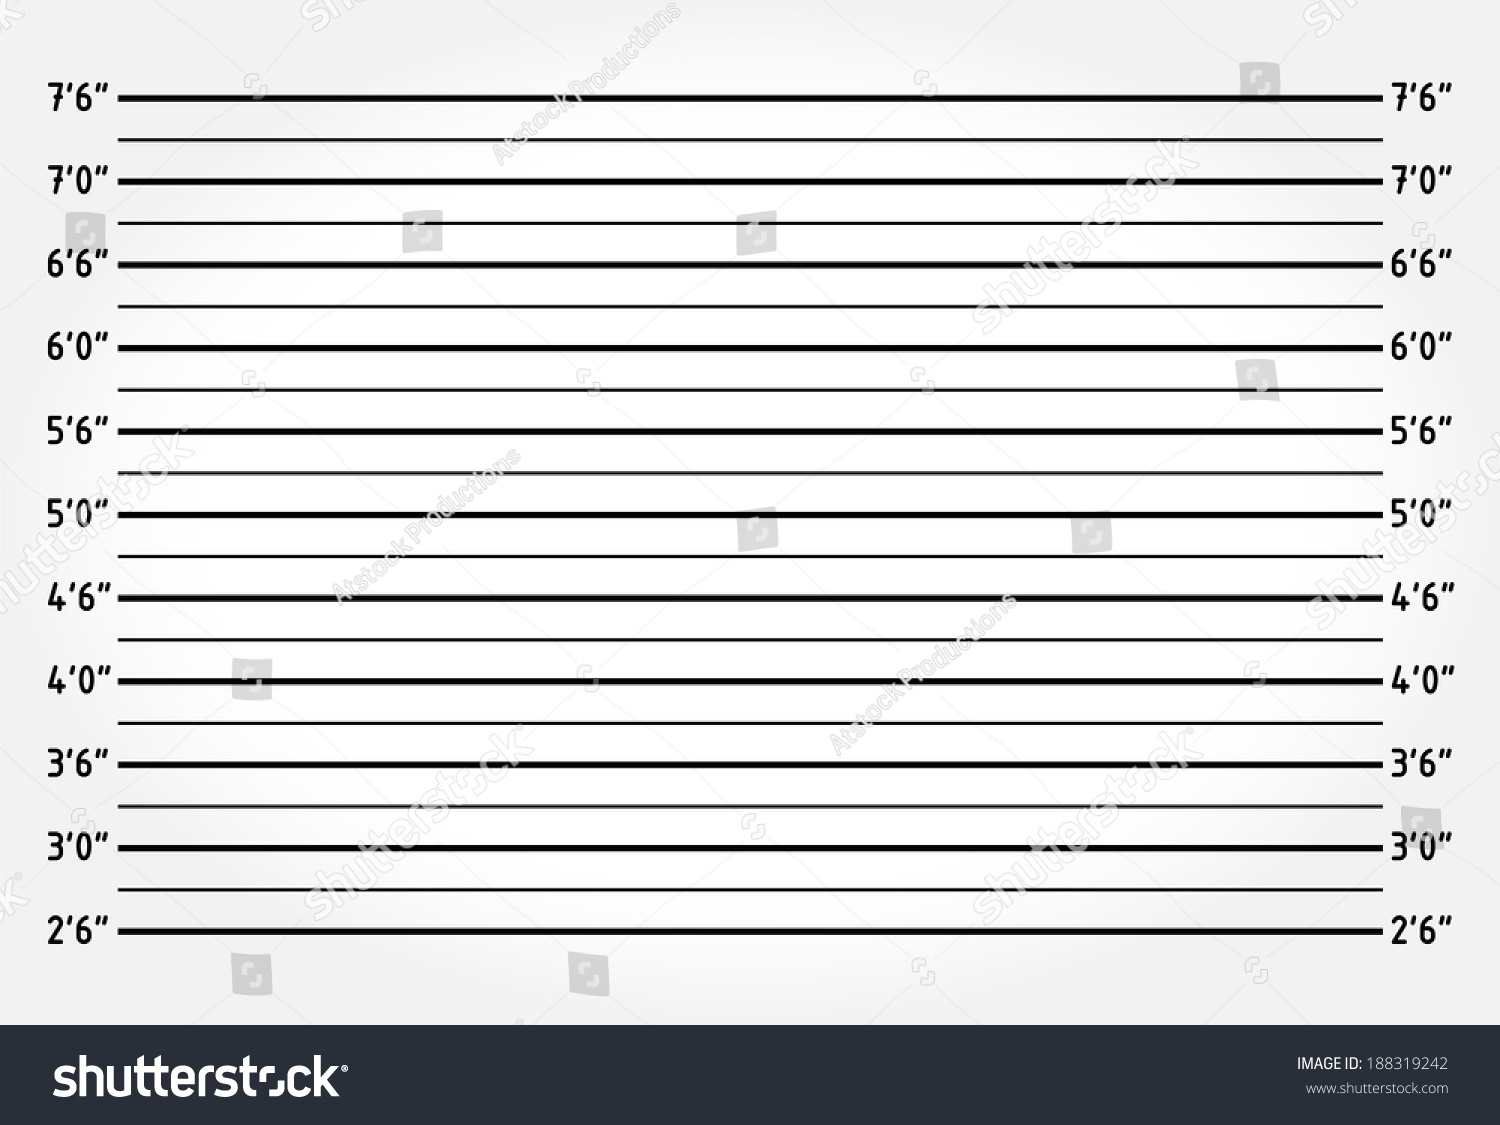 Police lineup or mugshot background - Royalty Free Stock Vector ...